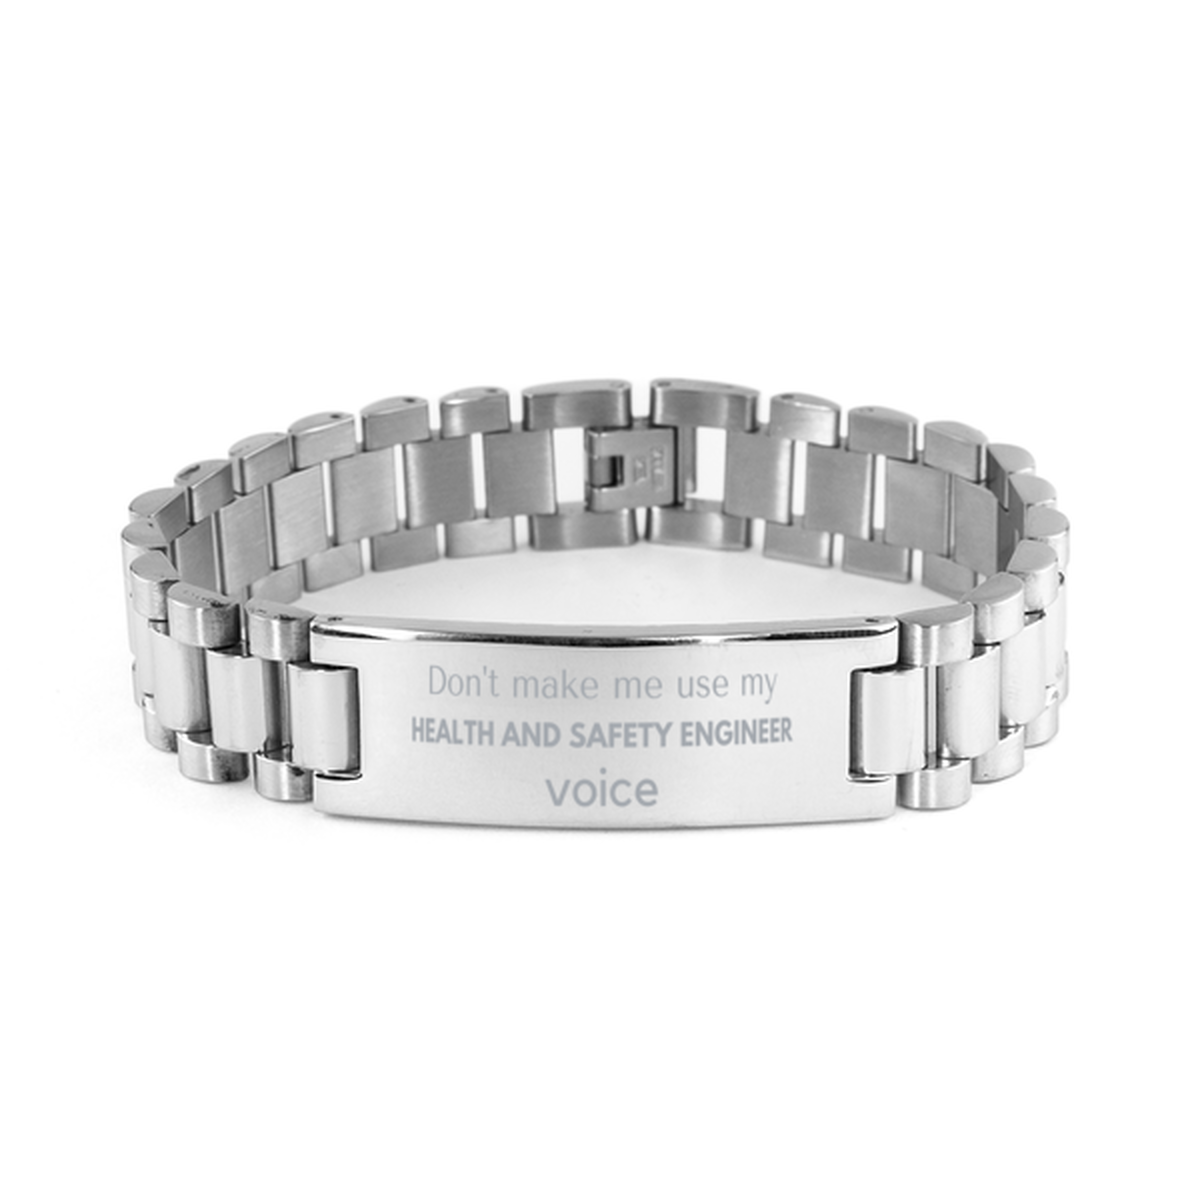 Don't make me use my Health and Safety Engineer voice, Sarcasm Health and Safety Engineer Gifts, Christmas Health and Safety Engineer Ladder Stainless Steel Bracelet Birthday Unique Gifts For Health and Safety Engineer Coworkers, Men, Women, Colleague, Fr